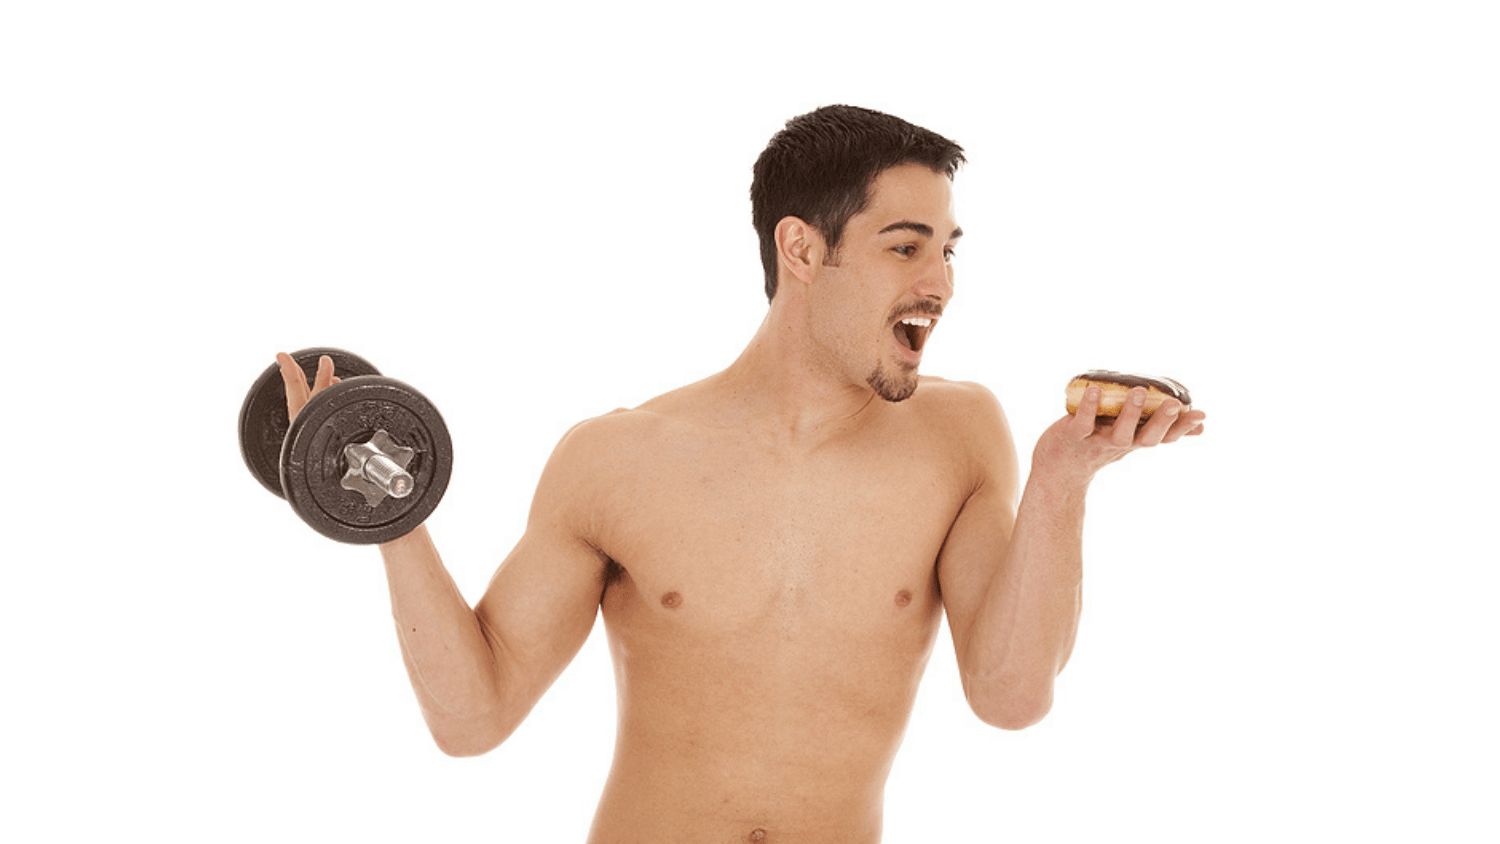 4 Ways To Gain Weight And Build Muscle